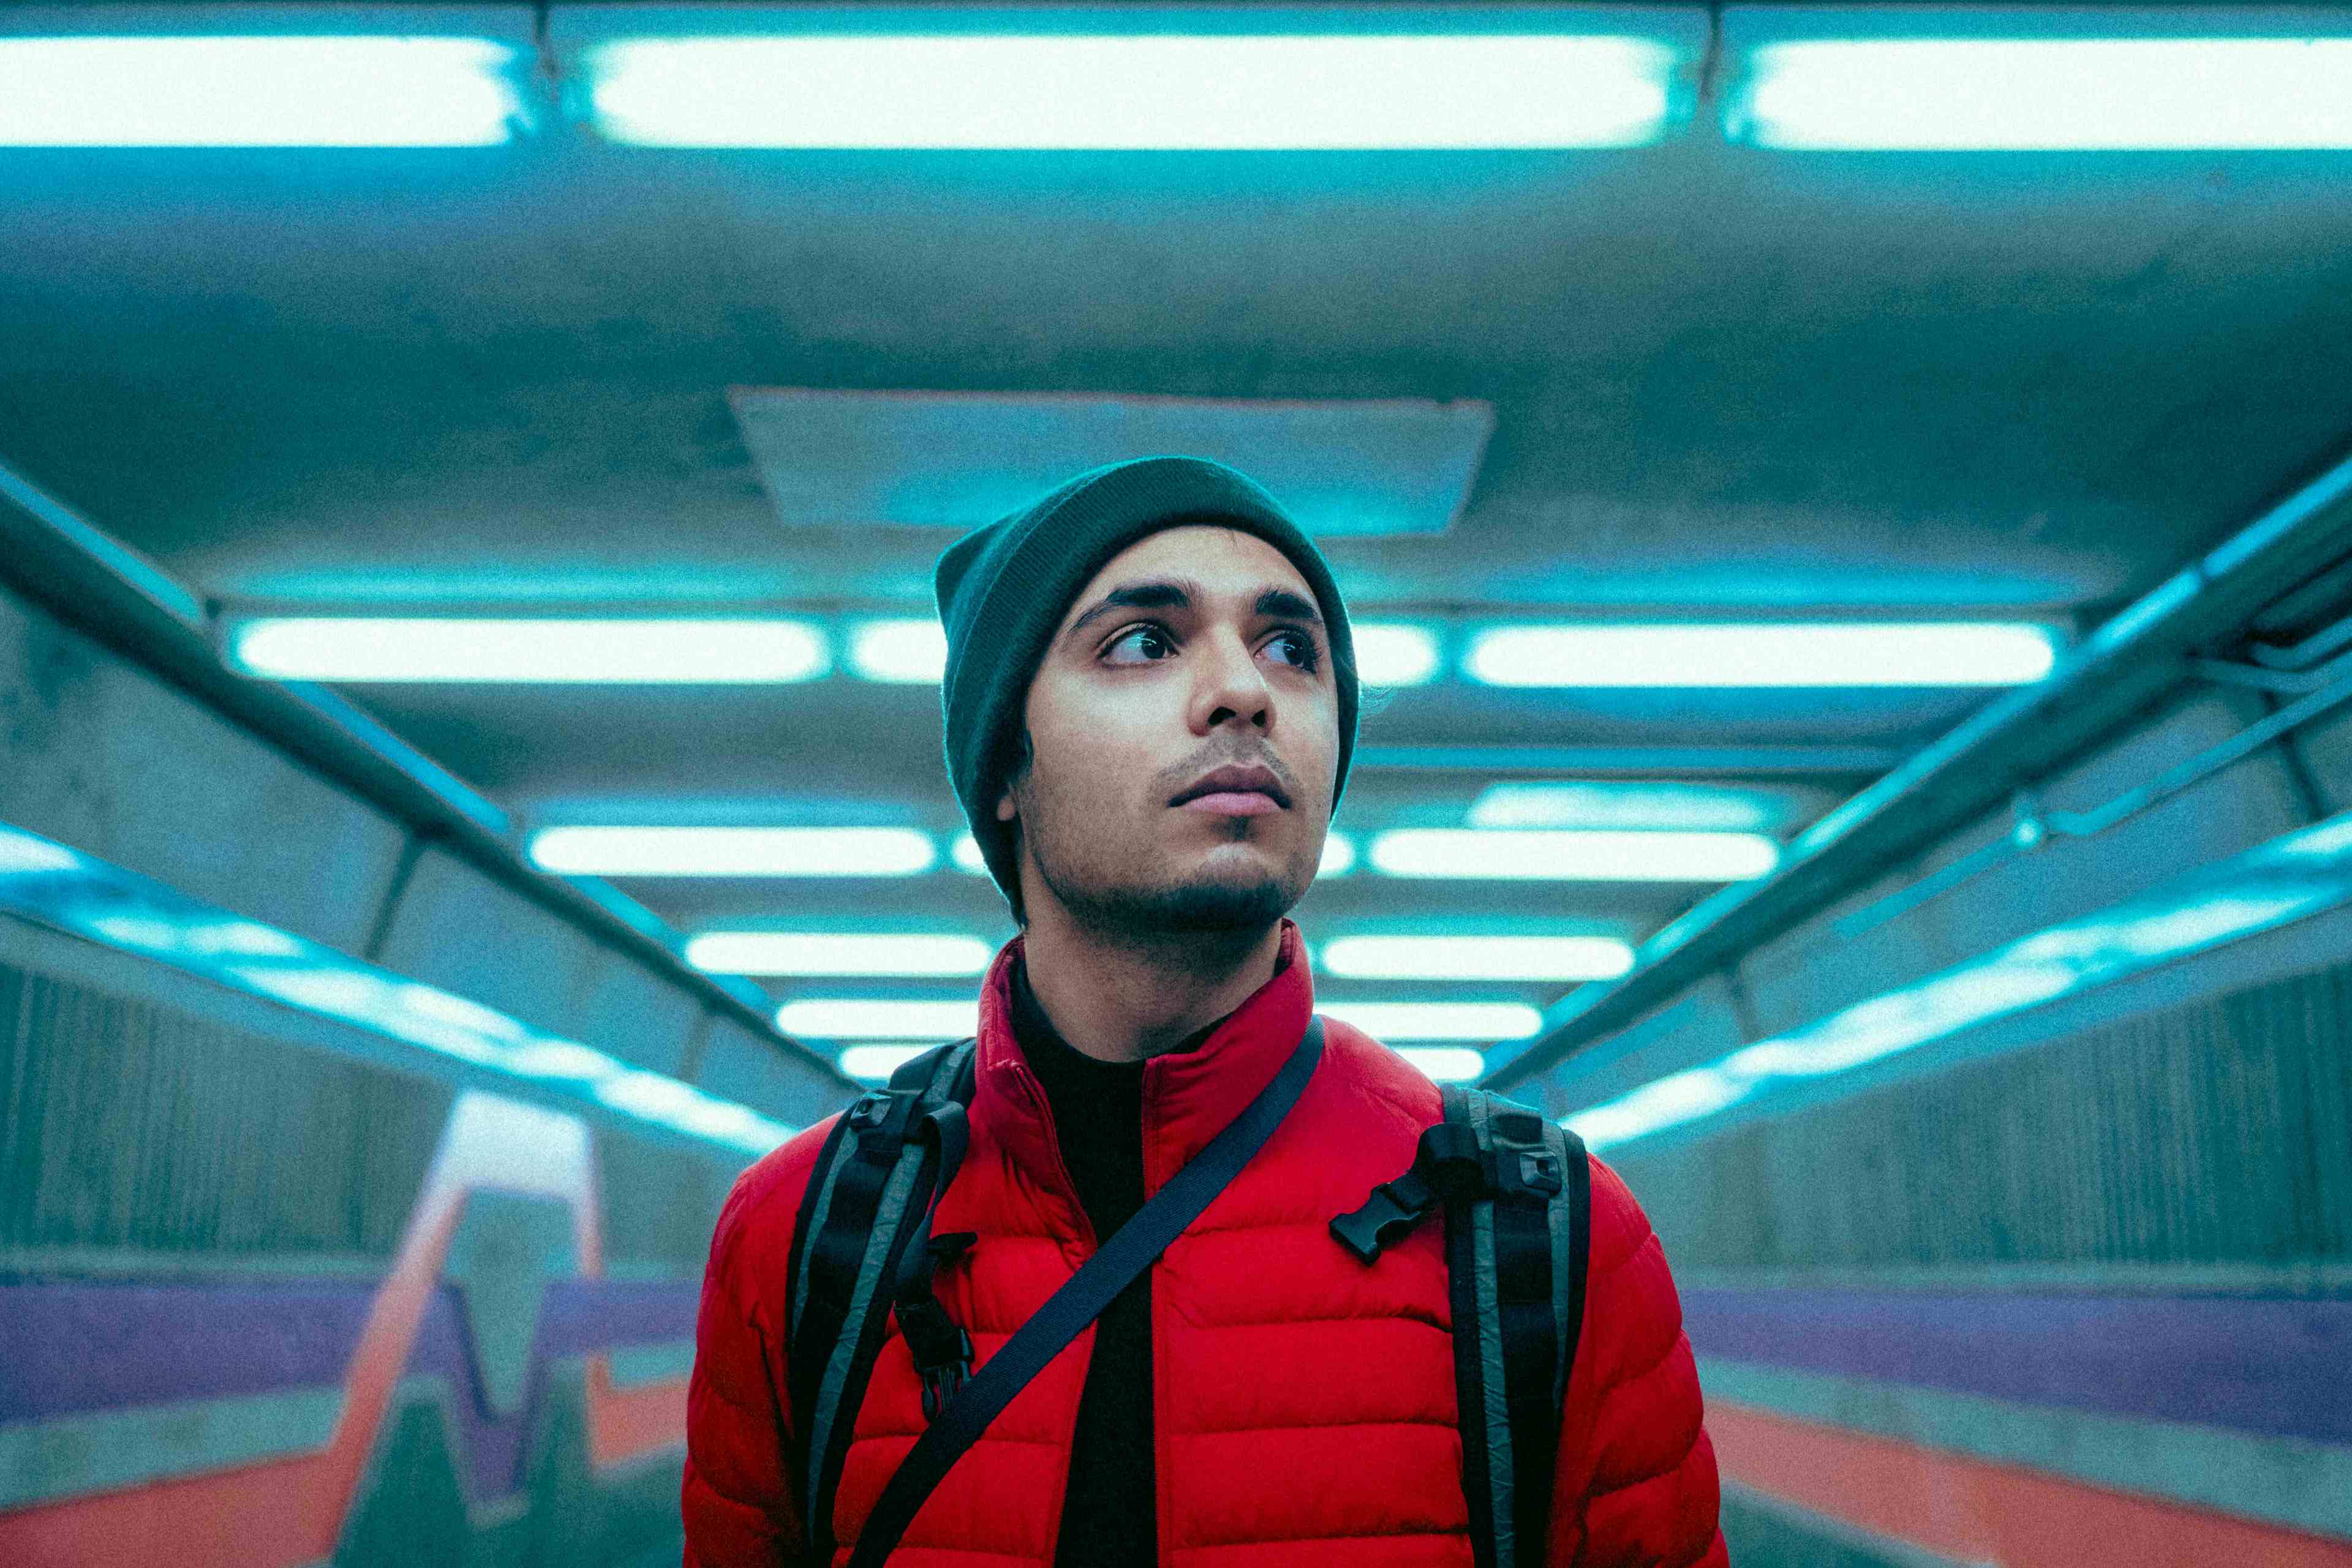 A cinematic photo of me standing in the Monteal metro